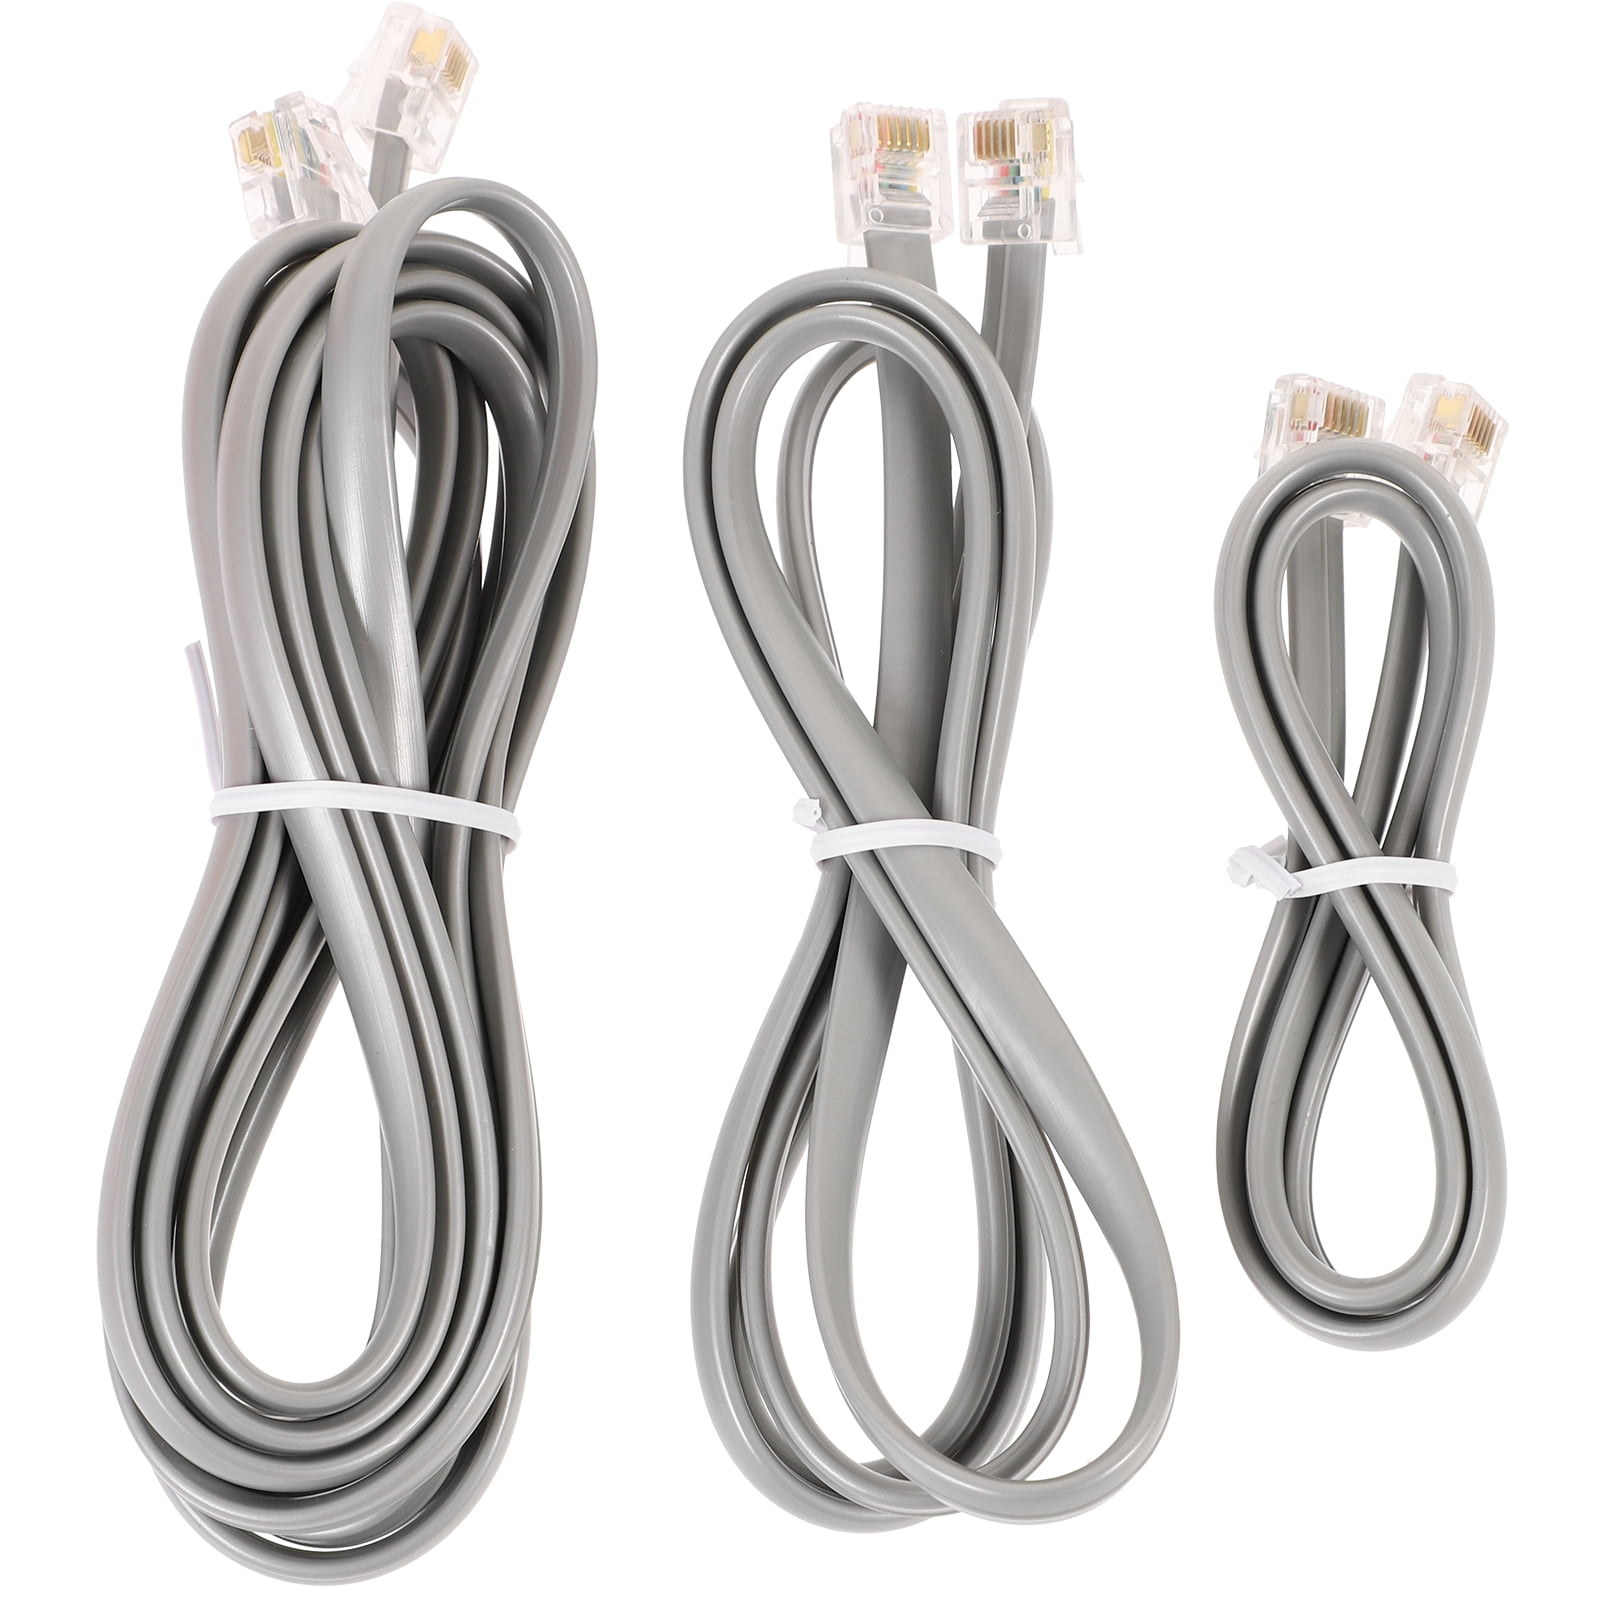 3pcs Telephone Extension Cord Phone Cable Landline Phone Wire Line Phone  Cord Kits